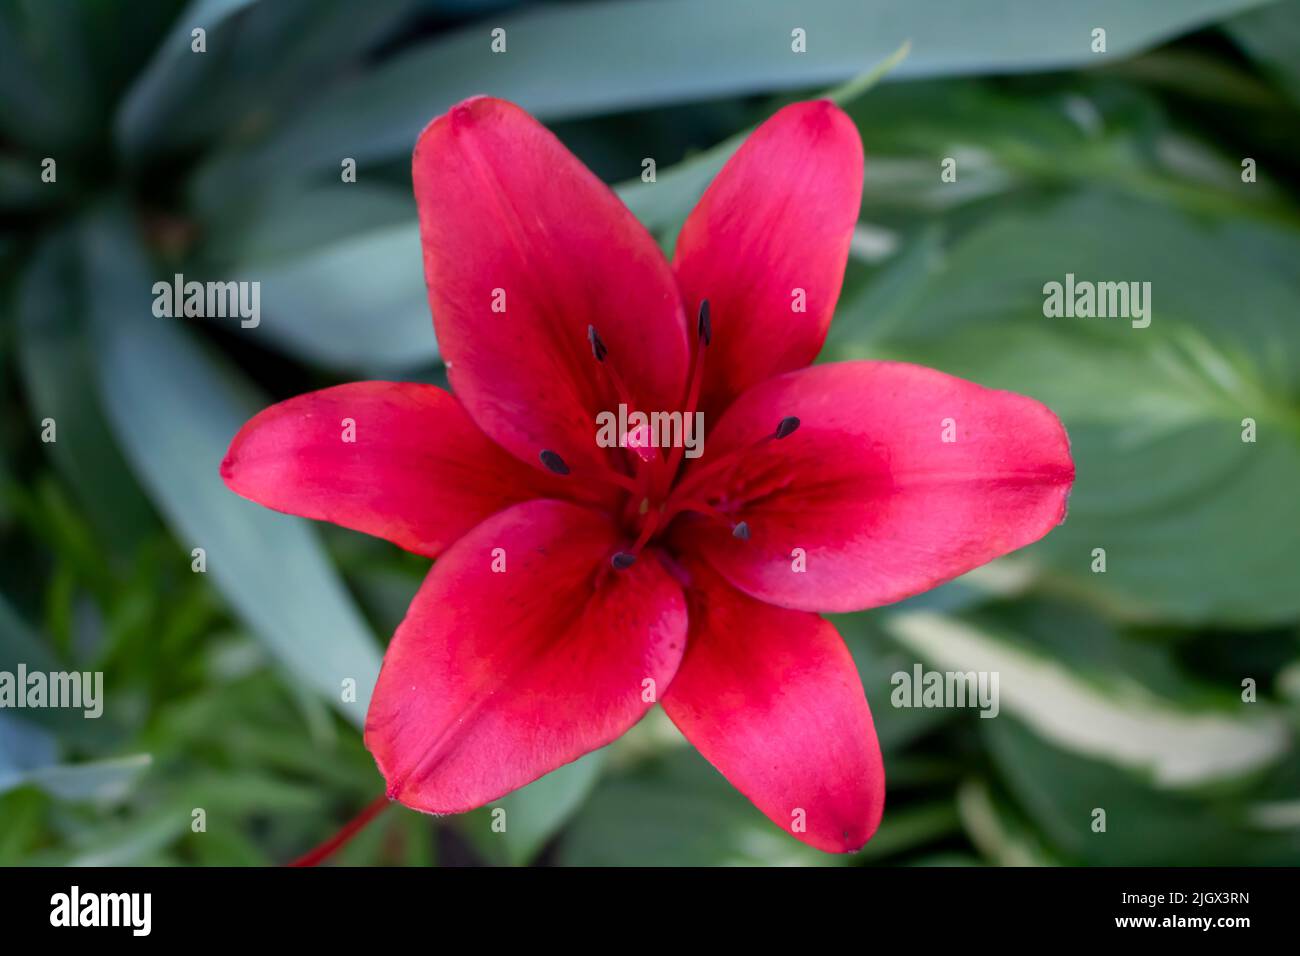 Asiatic Lily Red County, Asiatic Lily Blacklis, blooming flower at an outdoor garden Stock Photo